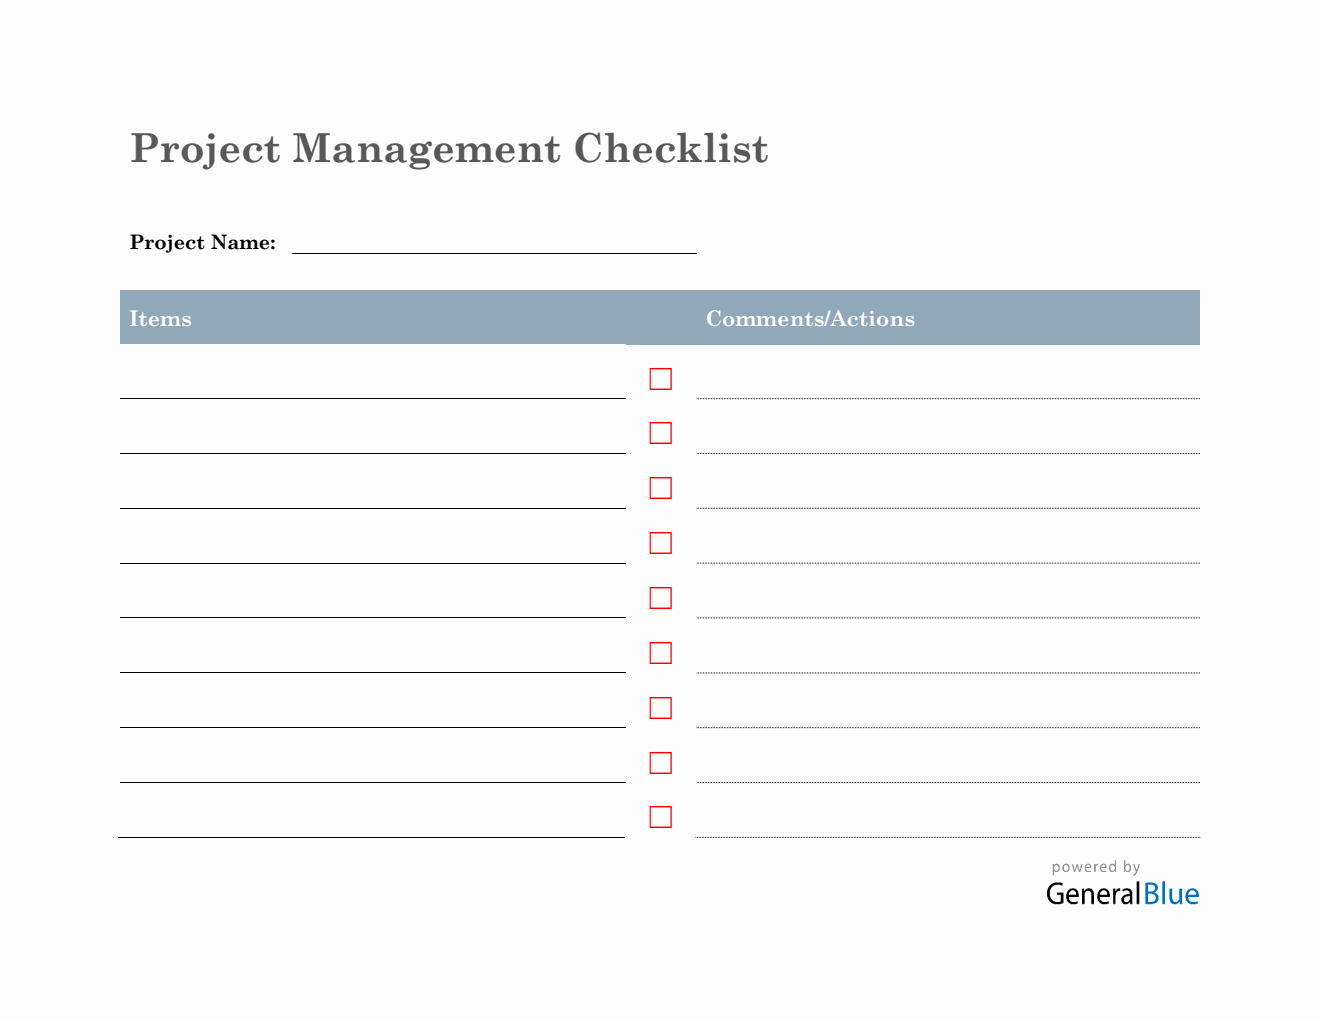 Project Management Checklist in Word